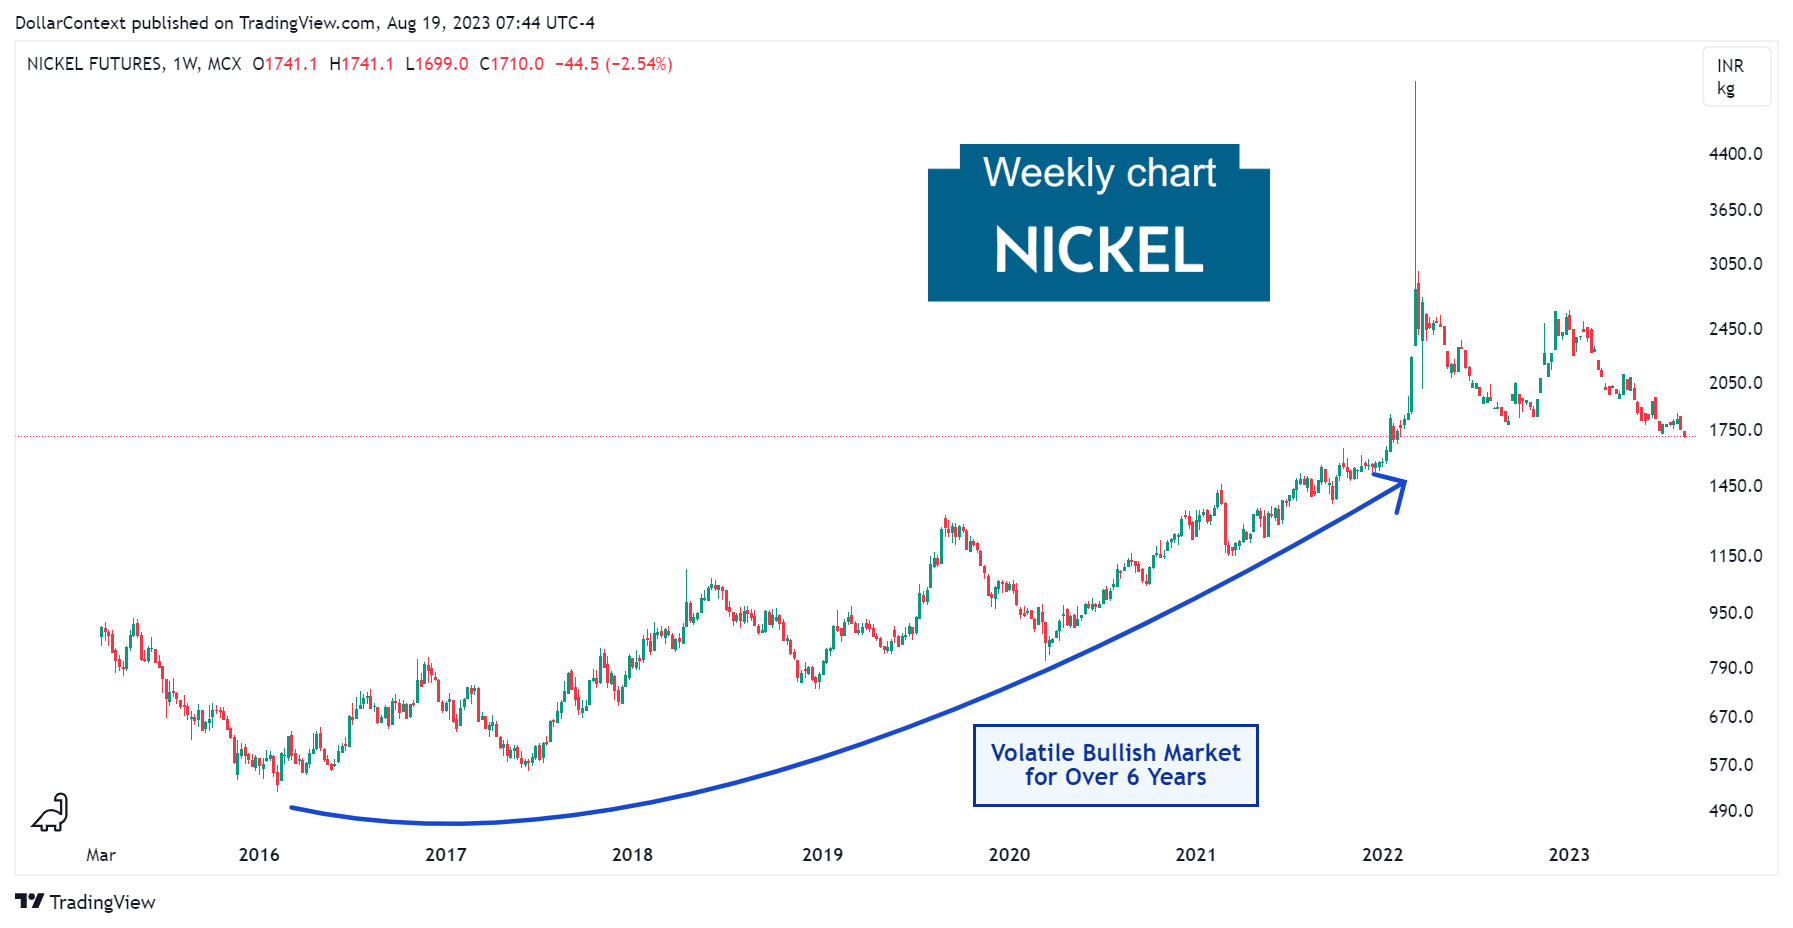 Nickel Futures: Extended Uptrend from January 2016 to February 2022 (Weekly Chart)